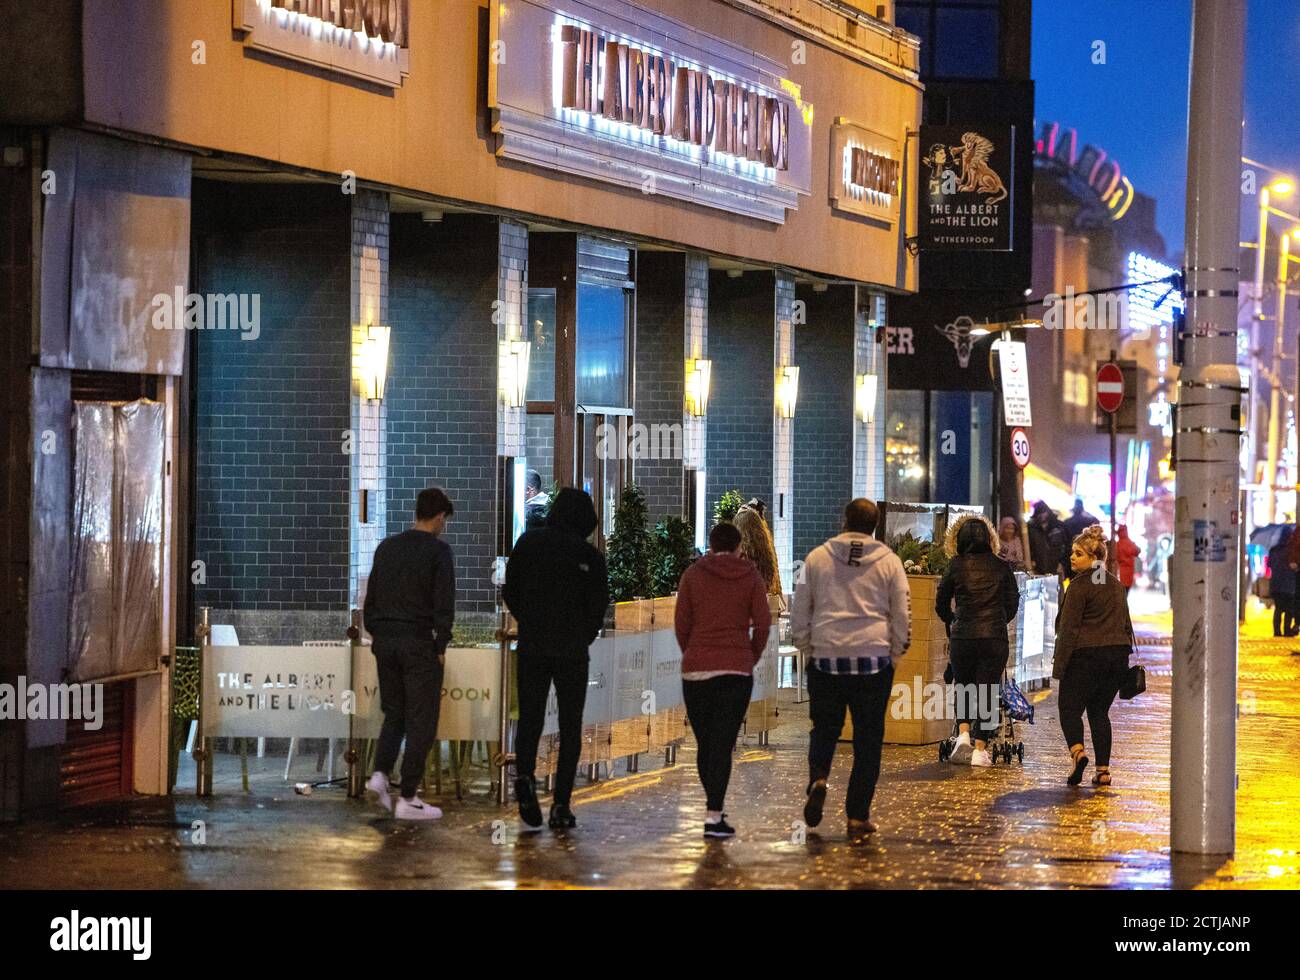 People outside a Wetherspoons pub in Blackpool. All pubs, bars, restaurants in England must have a 10pm closing time from Thursday, to help curb the spread of coronavirus. Stock Photo